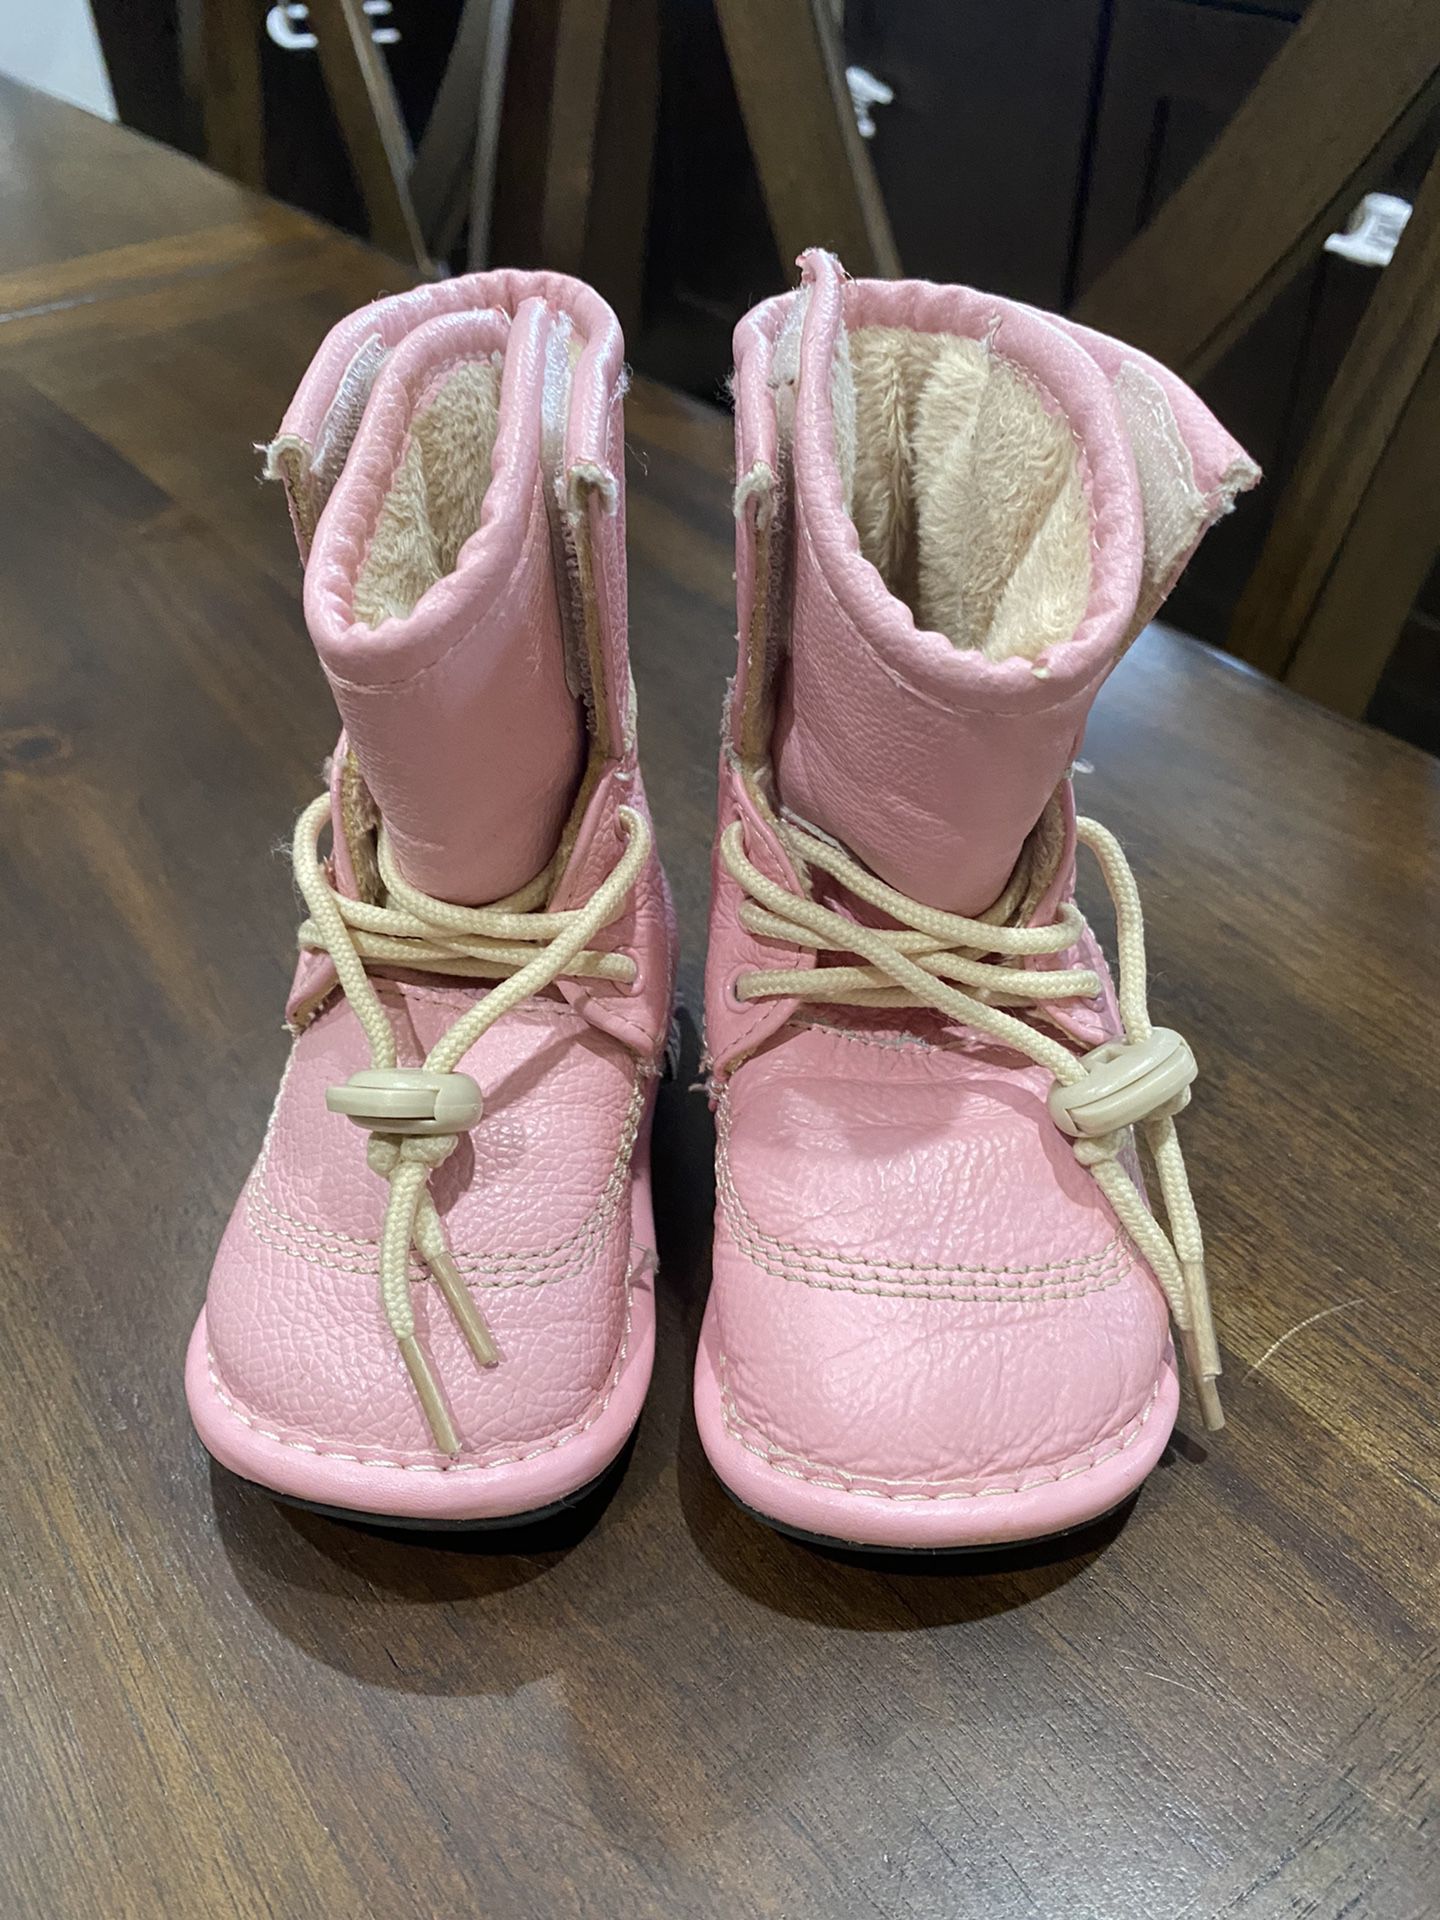 Baby Girl Winter/Snow Boots